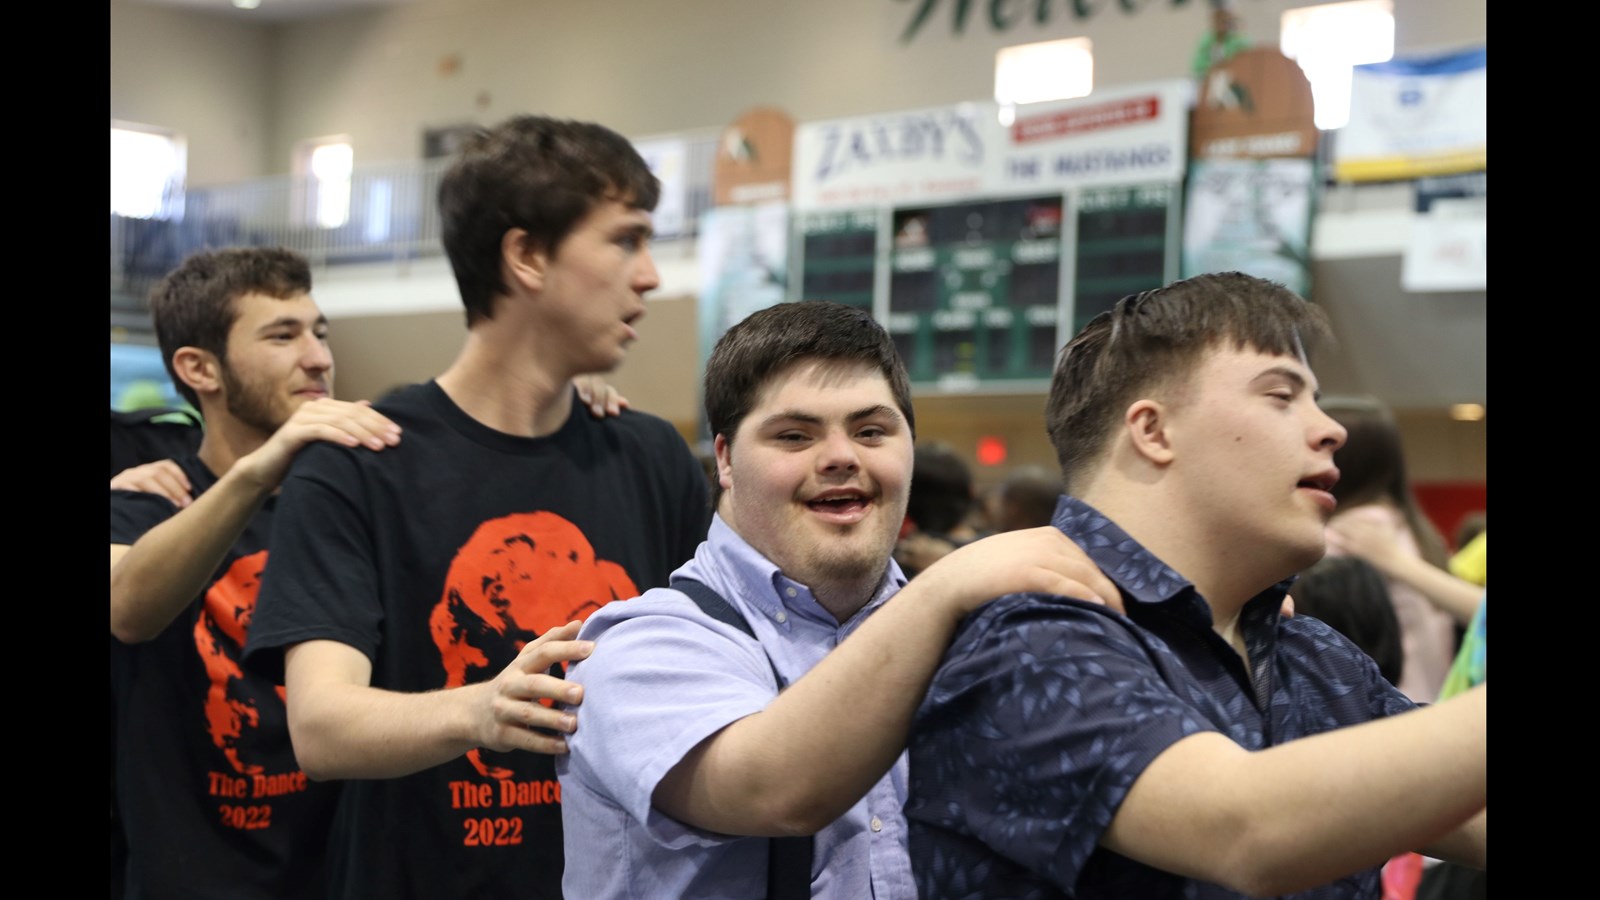 Kennesaw Mountain High School student volunteers dance and interact with their guests at the school’s annual dance for students with special needs.